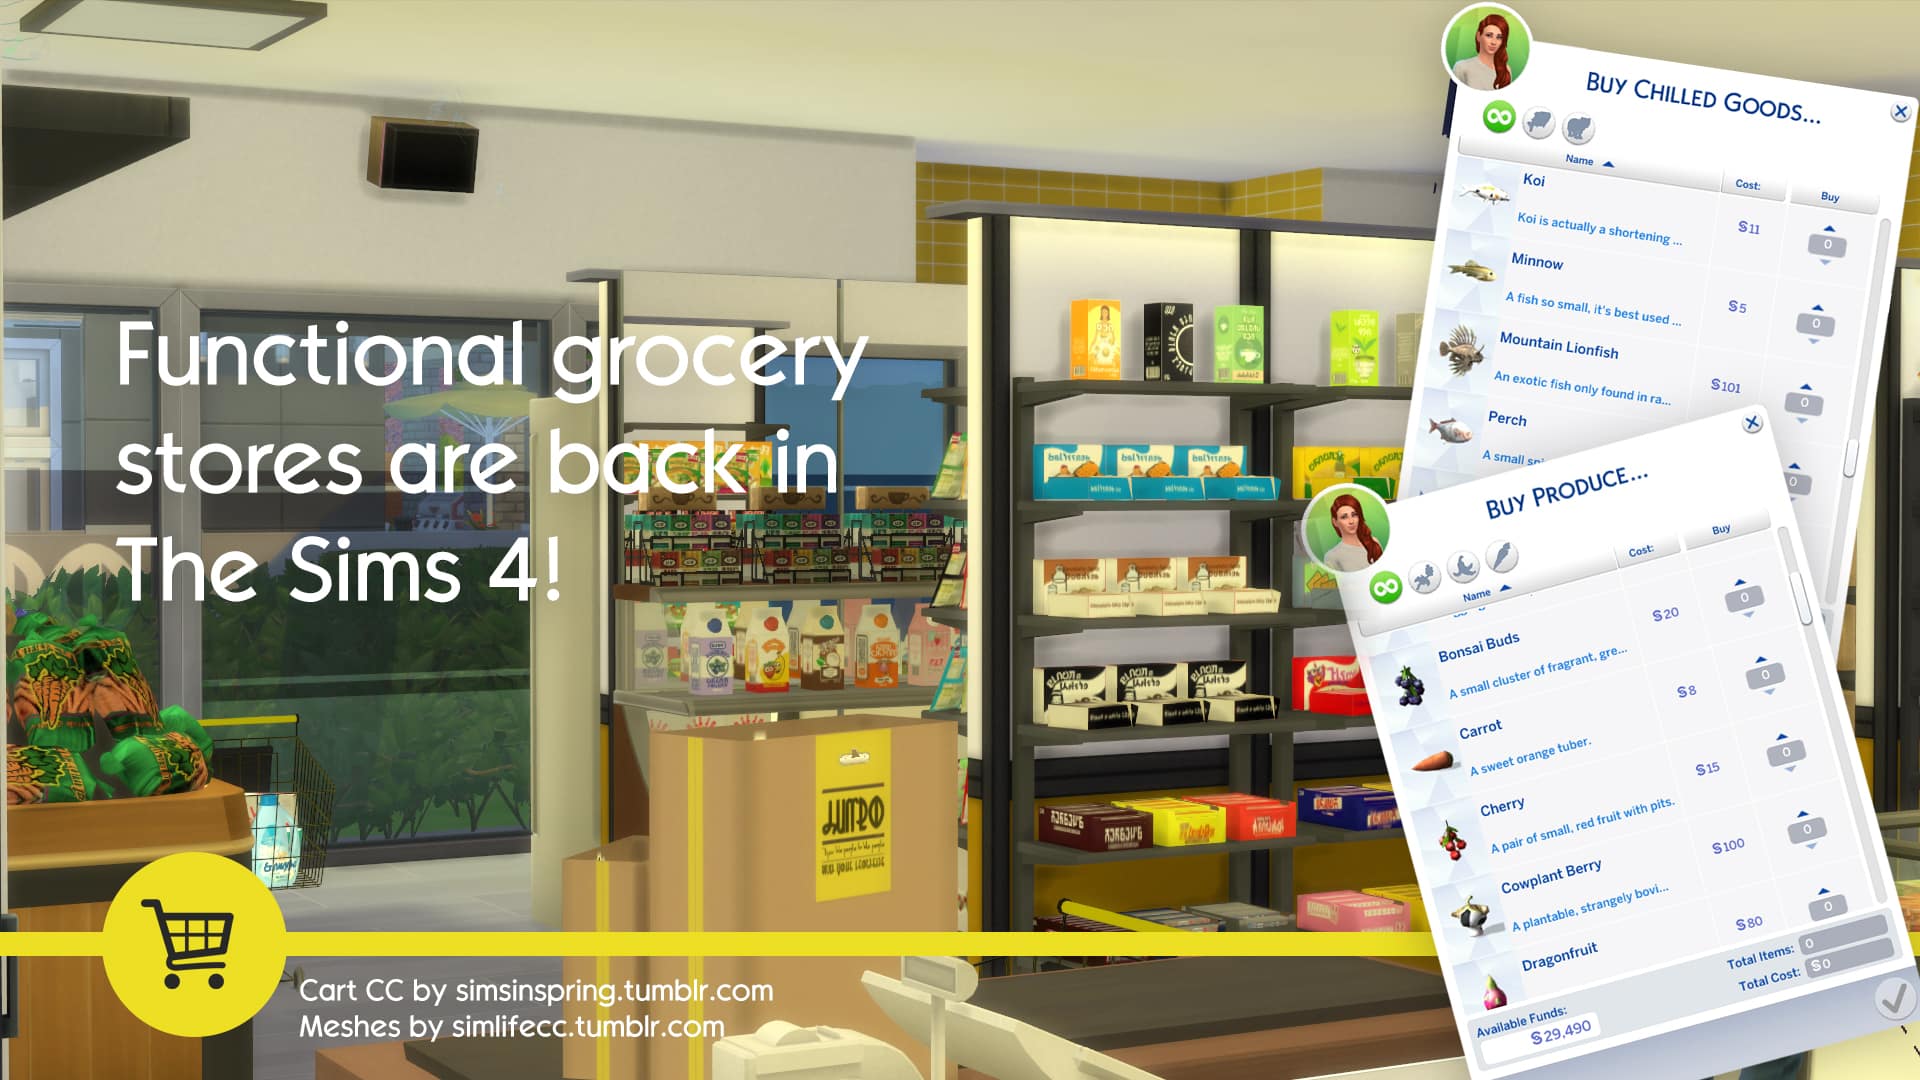 The Sims 4 Grocery Store Mod